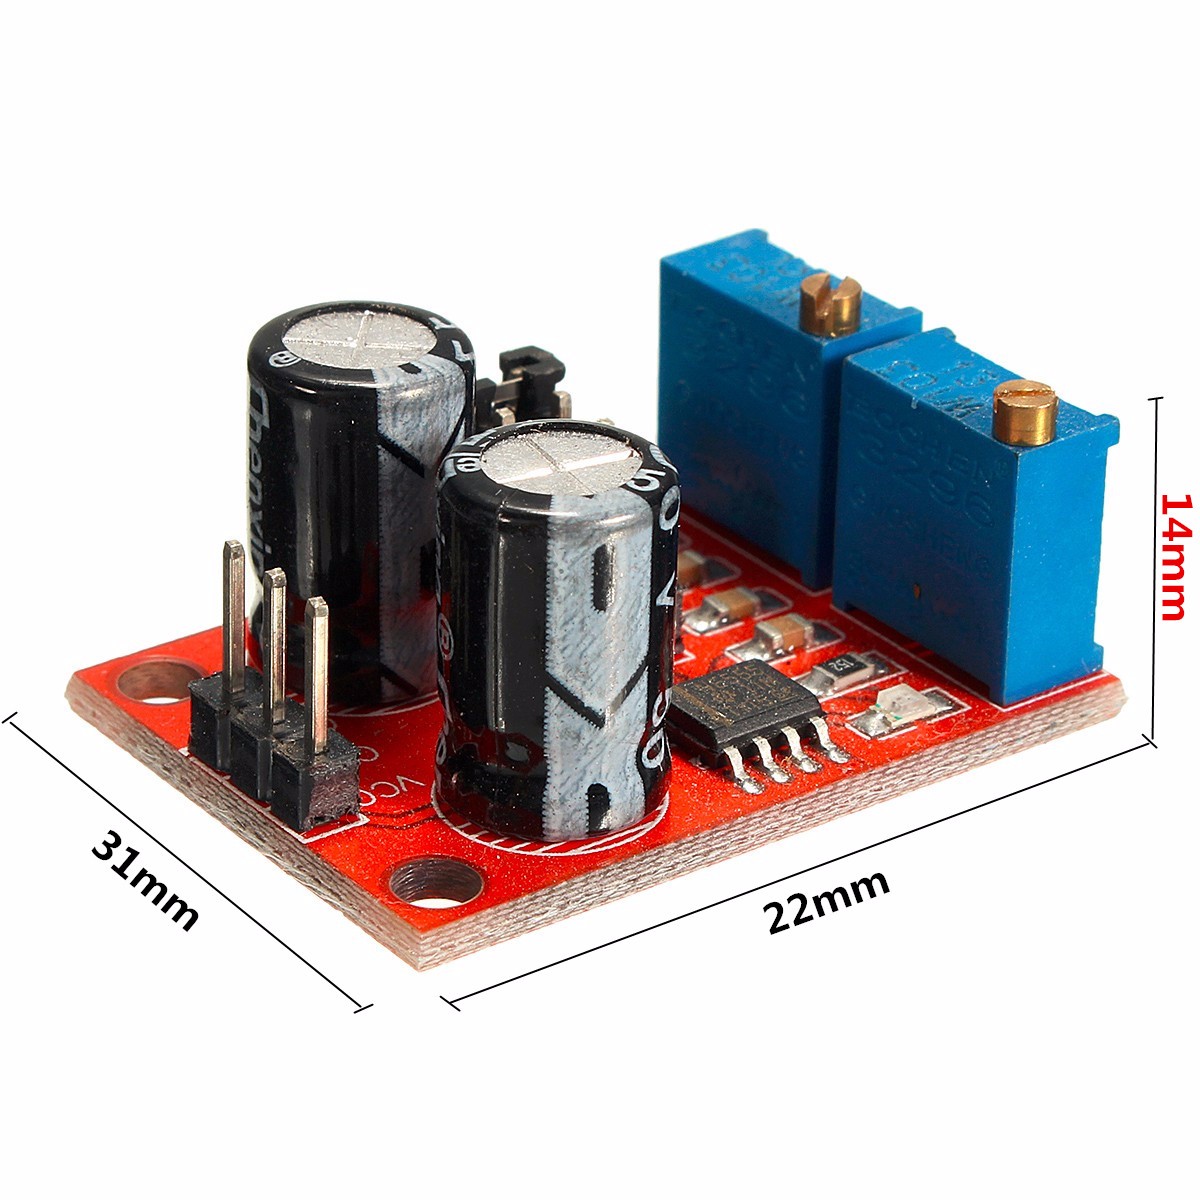 NE555-Pulse-Frequency-Duty-Cycle-Adjustable-Module-Square-Wave-Signal-Generator-Stepper-Motor-Driver-1163653